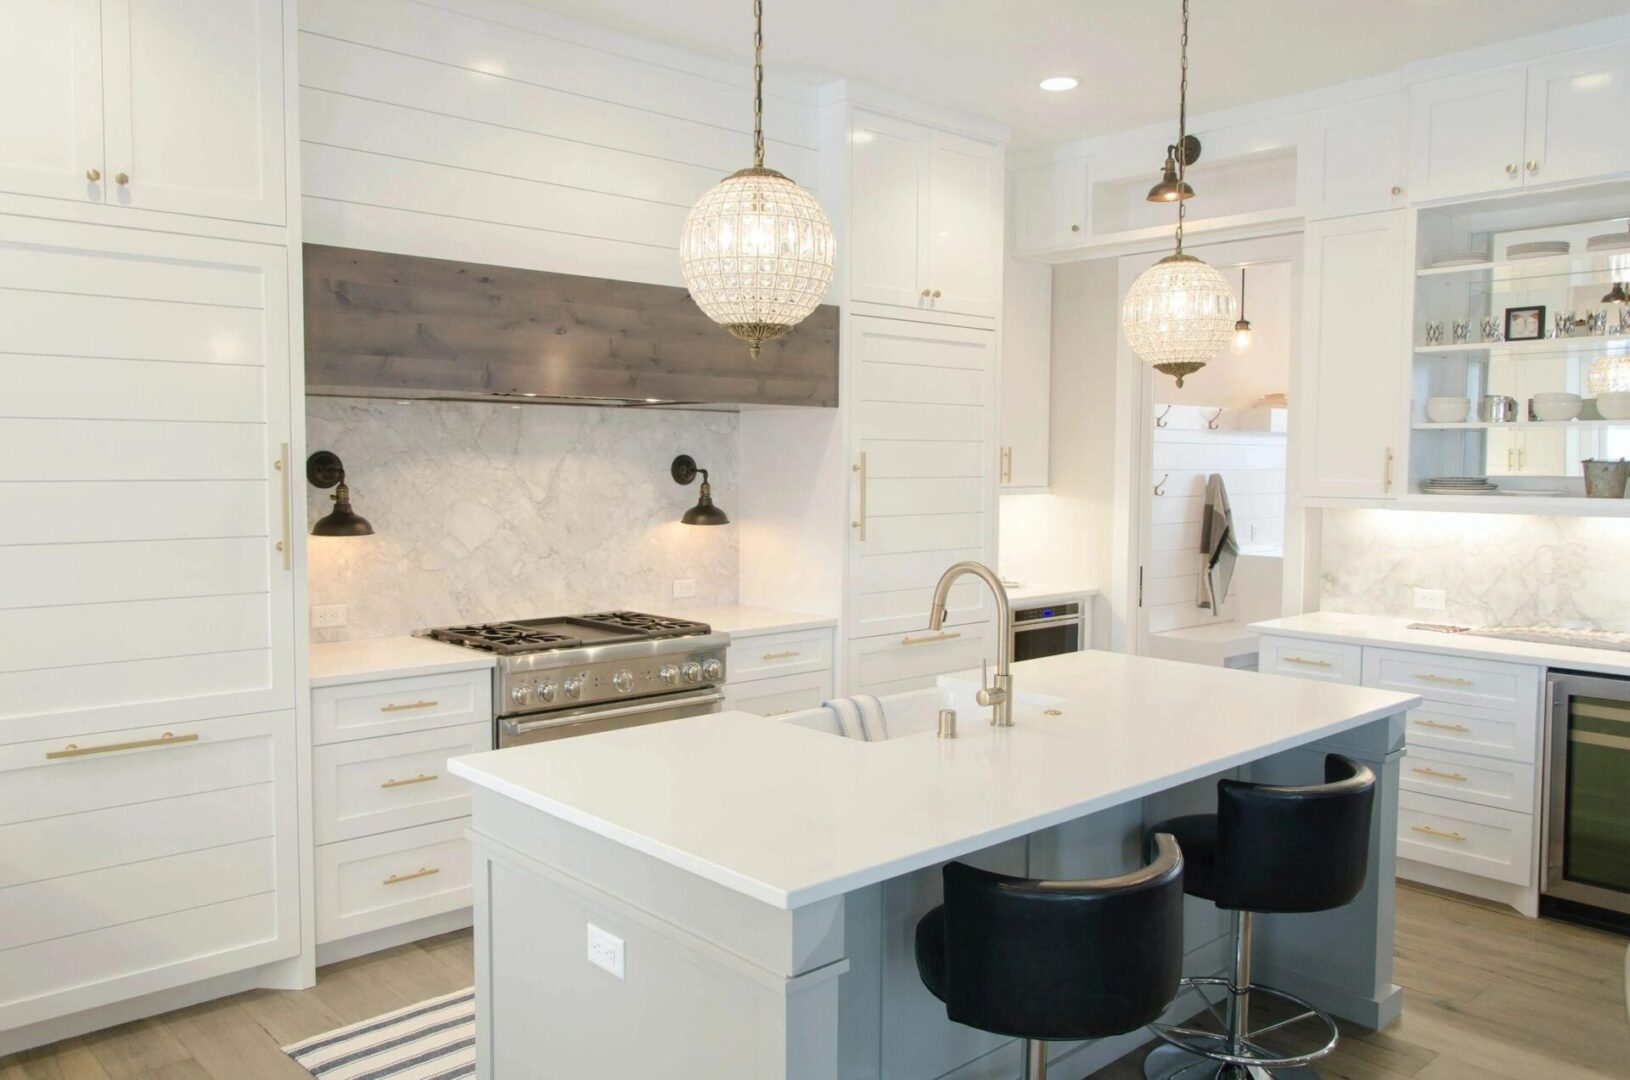 Modern kitchen interior with white cabinetry, marble countertops, and hanging pendant lights over a central island with bar stools.